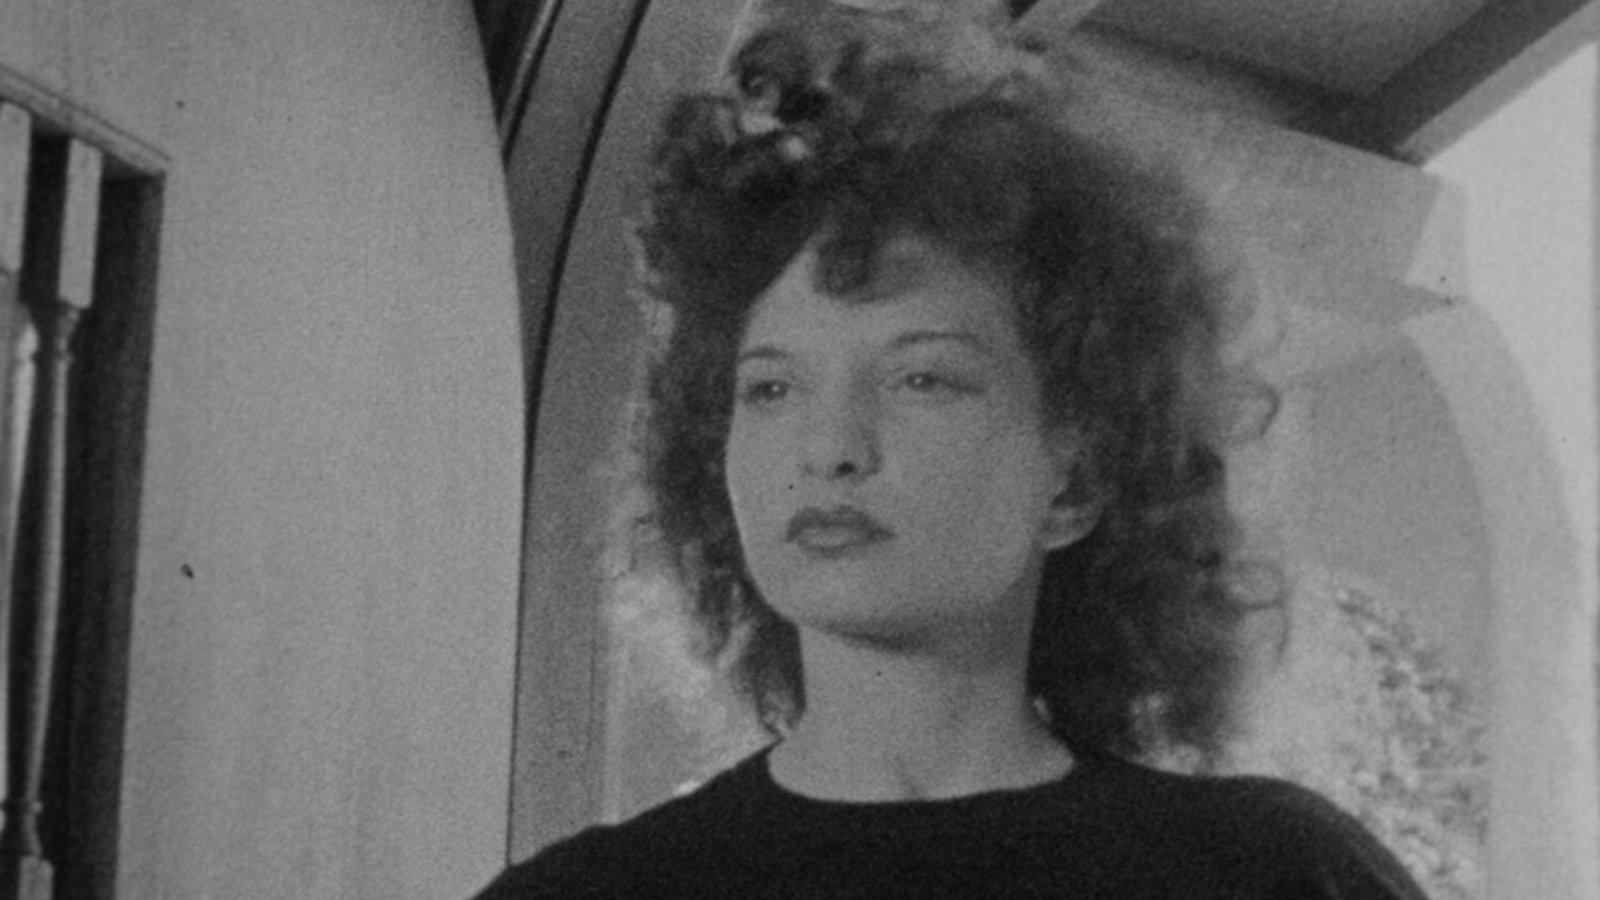 Standing inside a house, a woman with curly brown hair looks off into the distance past the camera